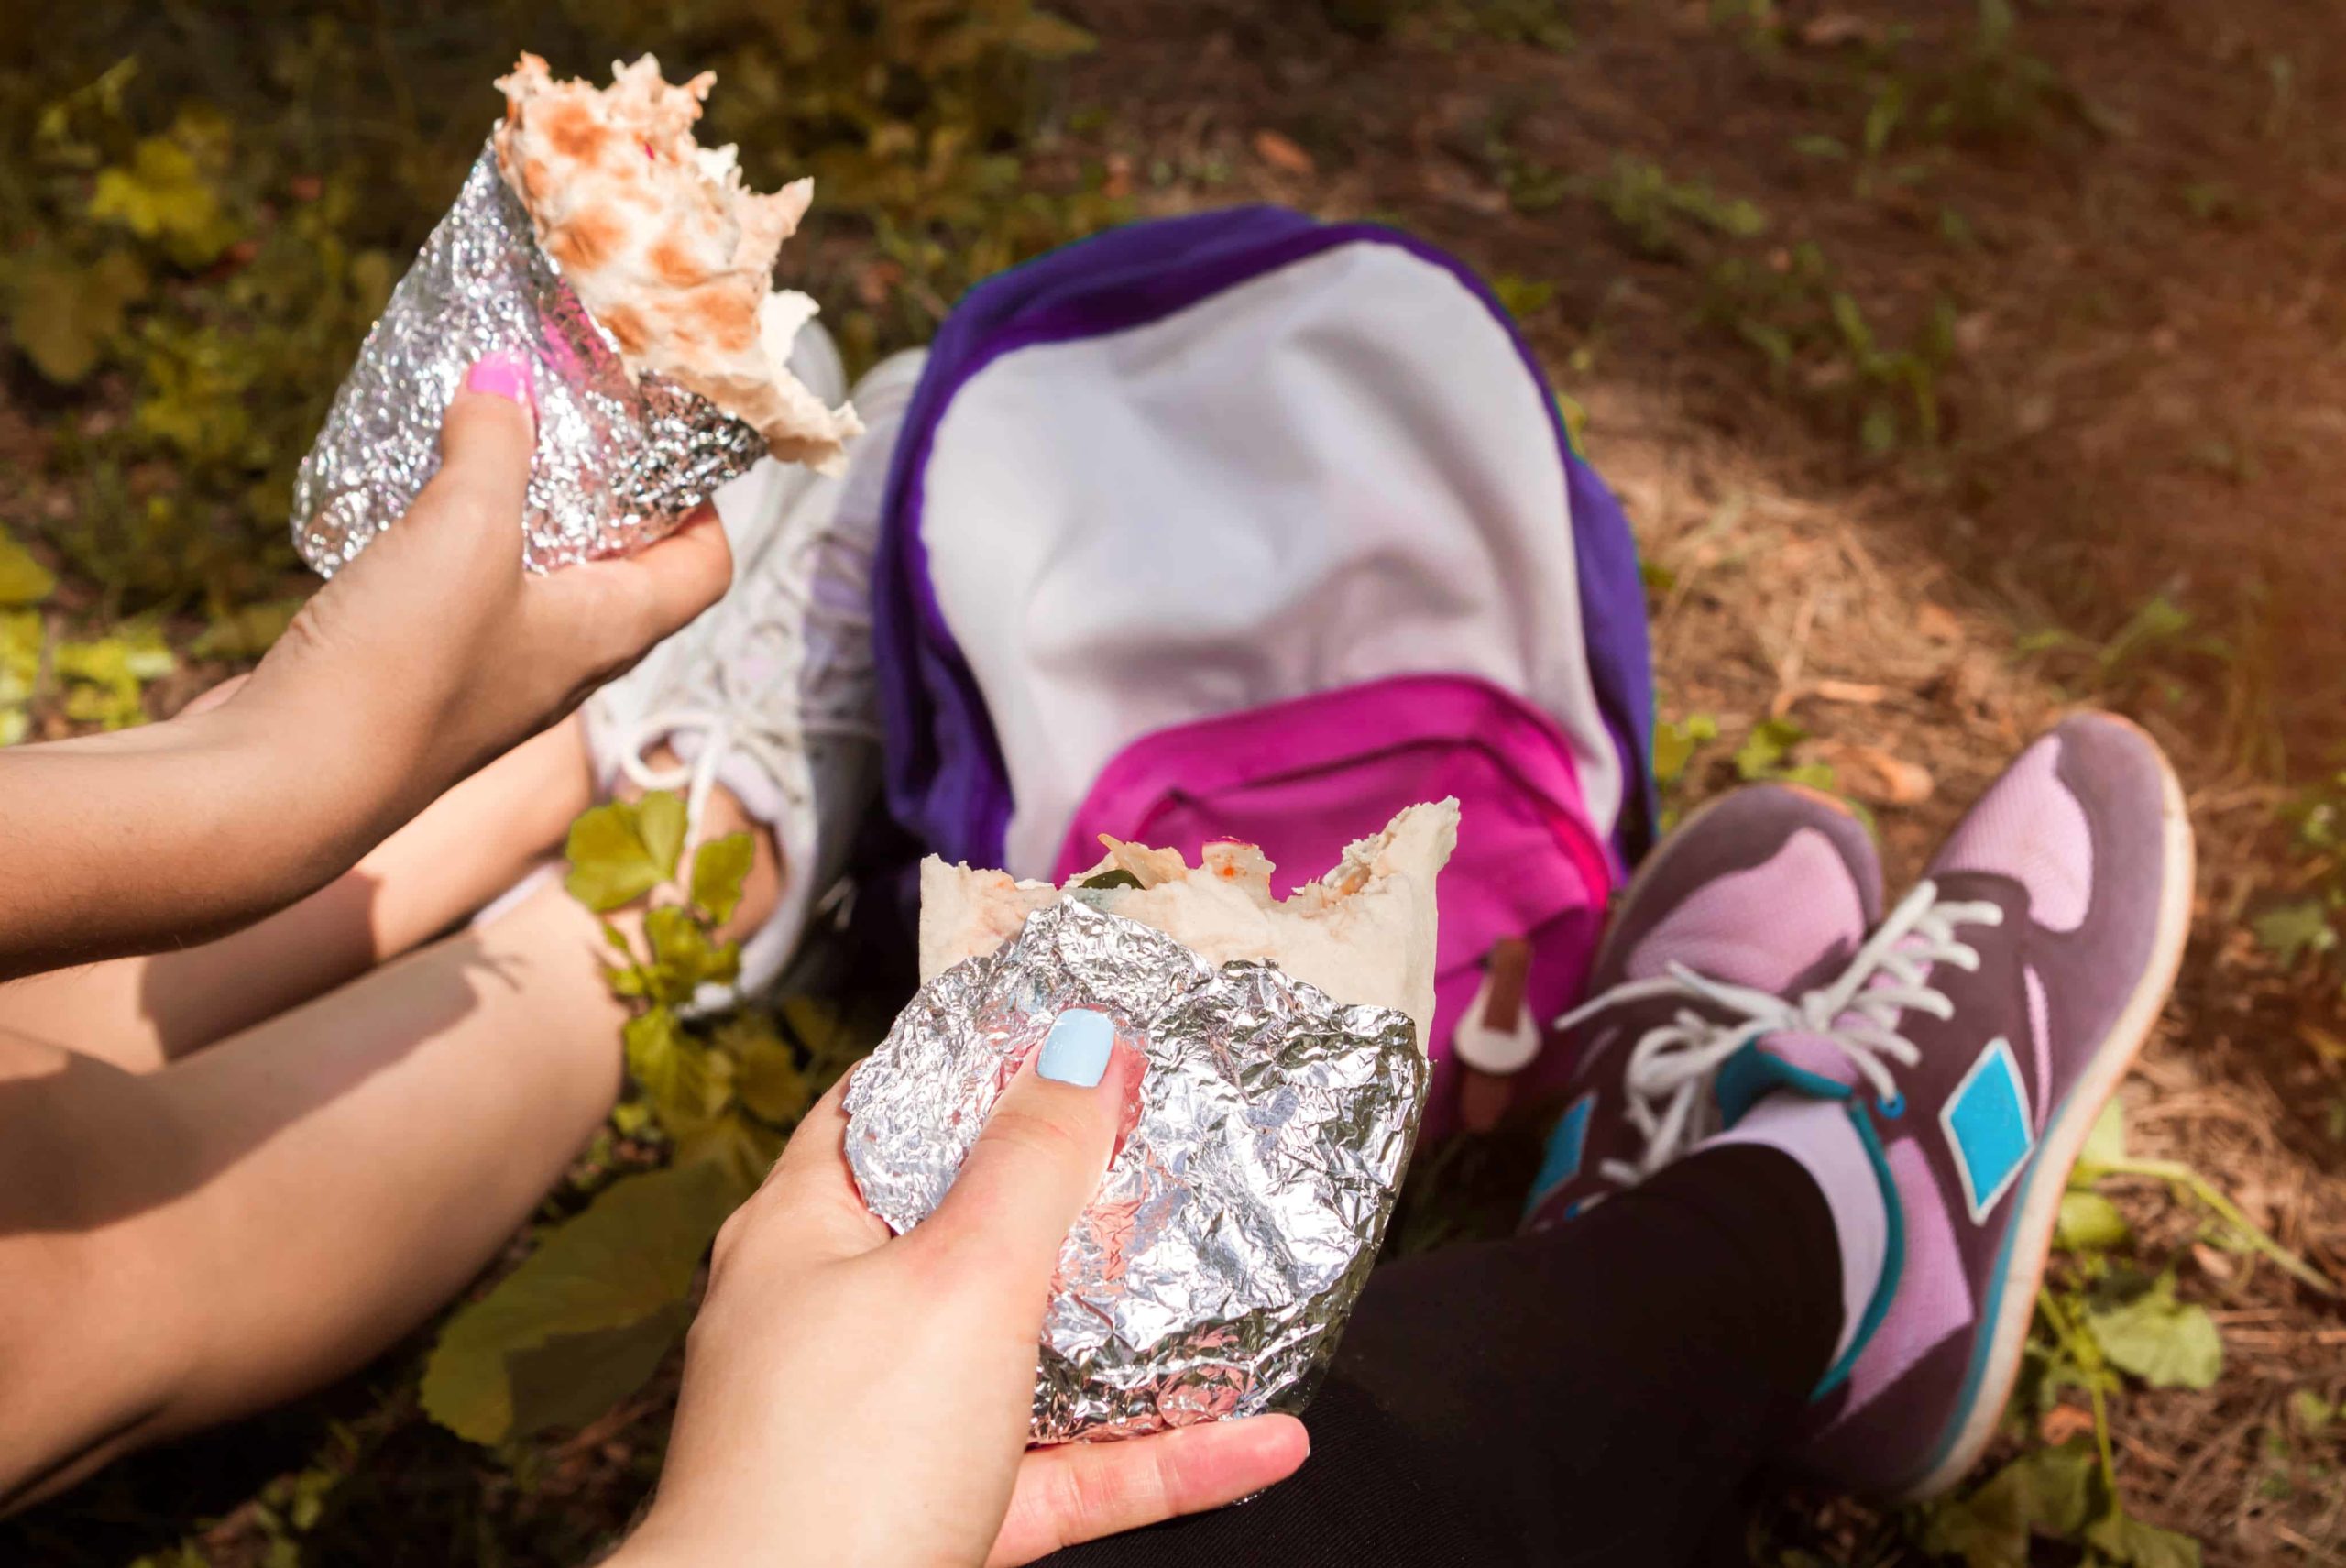 Tourists having rest and eating a sandwich in the forest